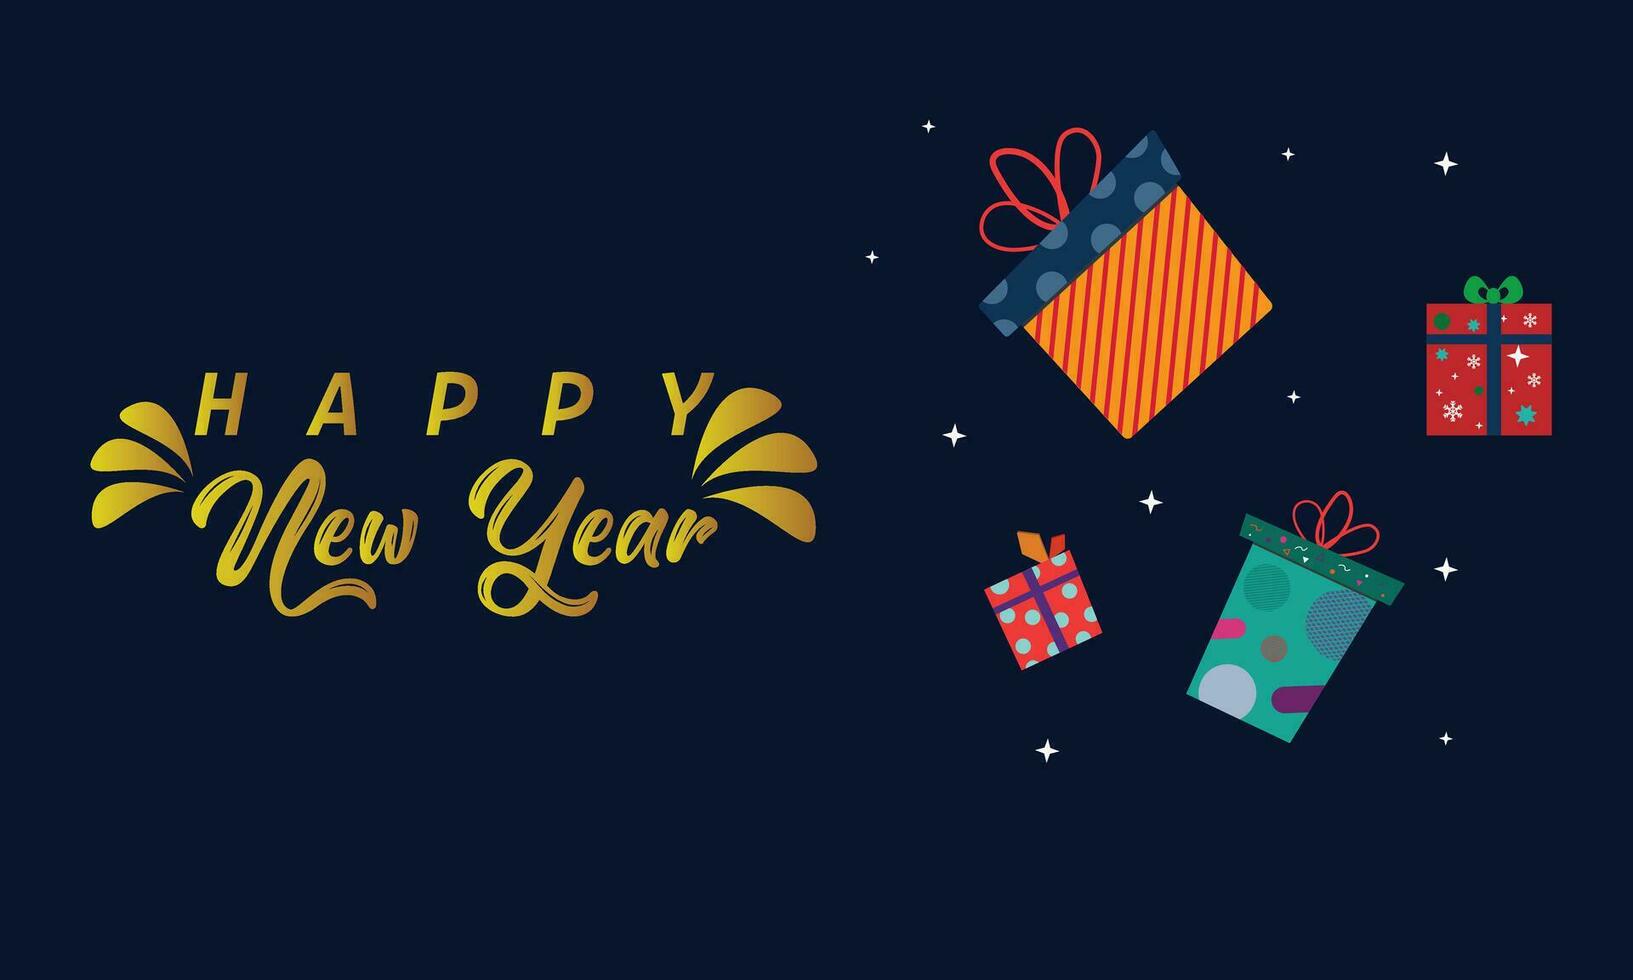 New Year vector design, Happy new year background